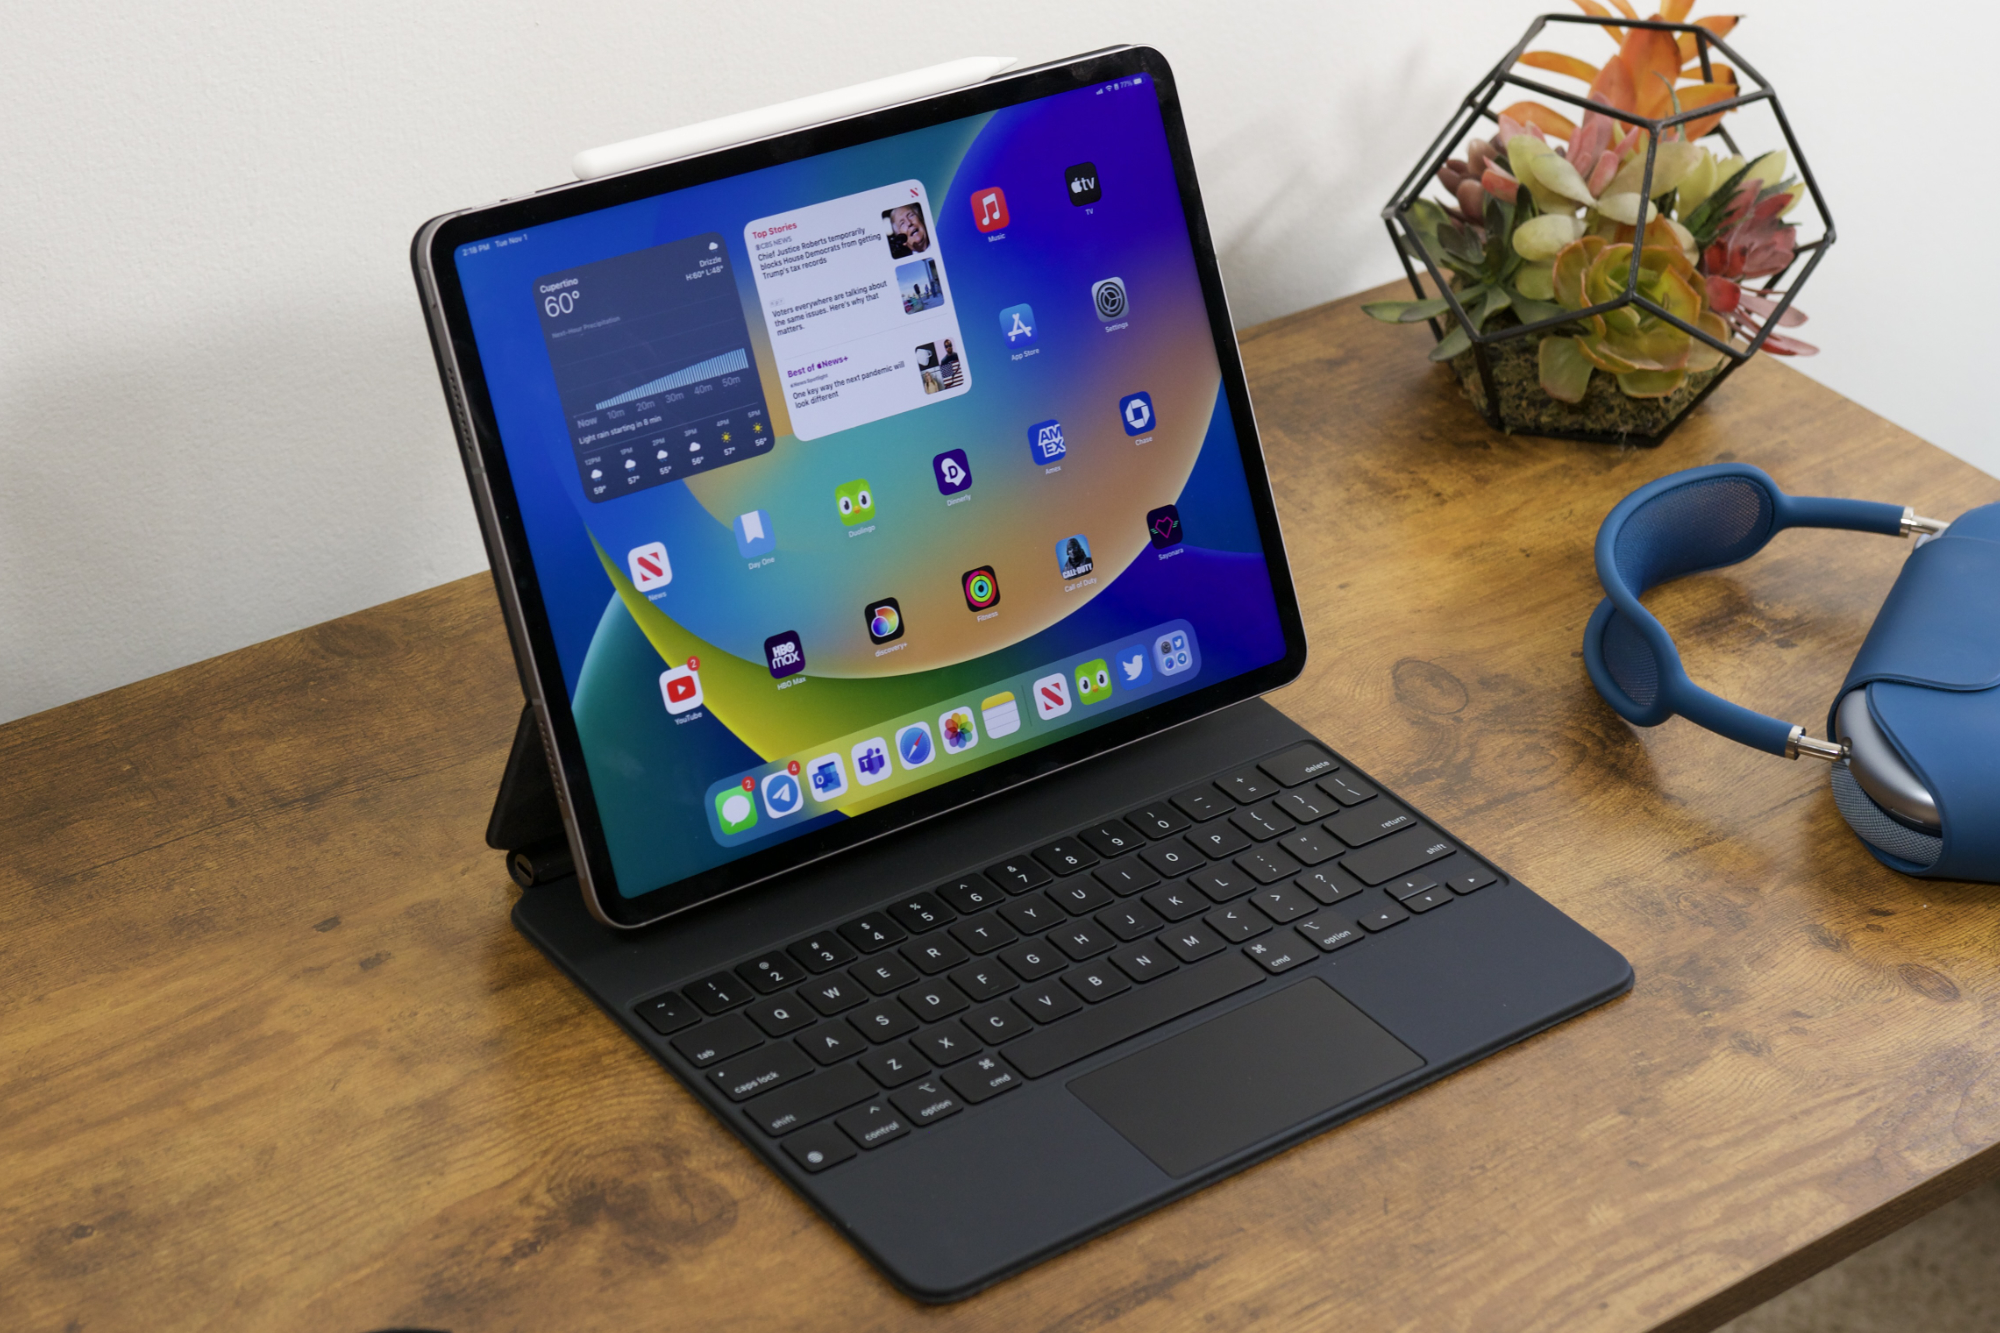 iPad Pro: Should You Buy? Features, Reviews and More